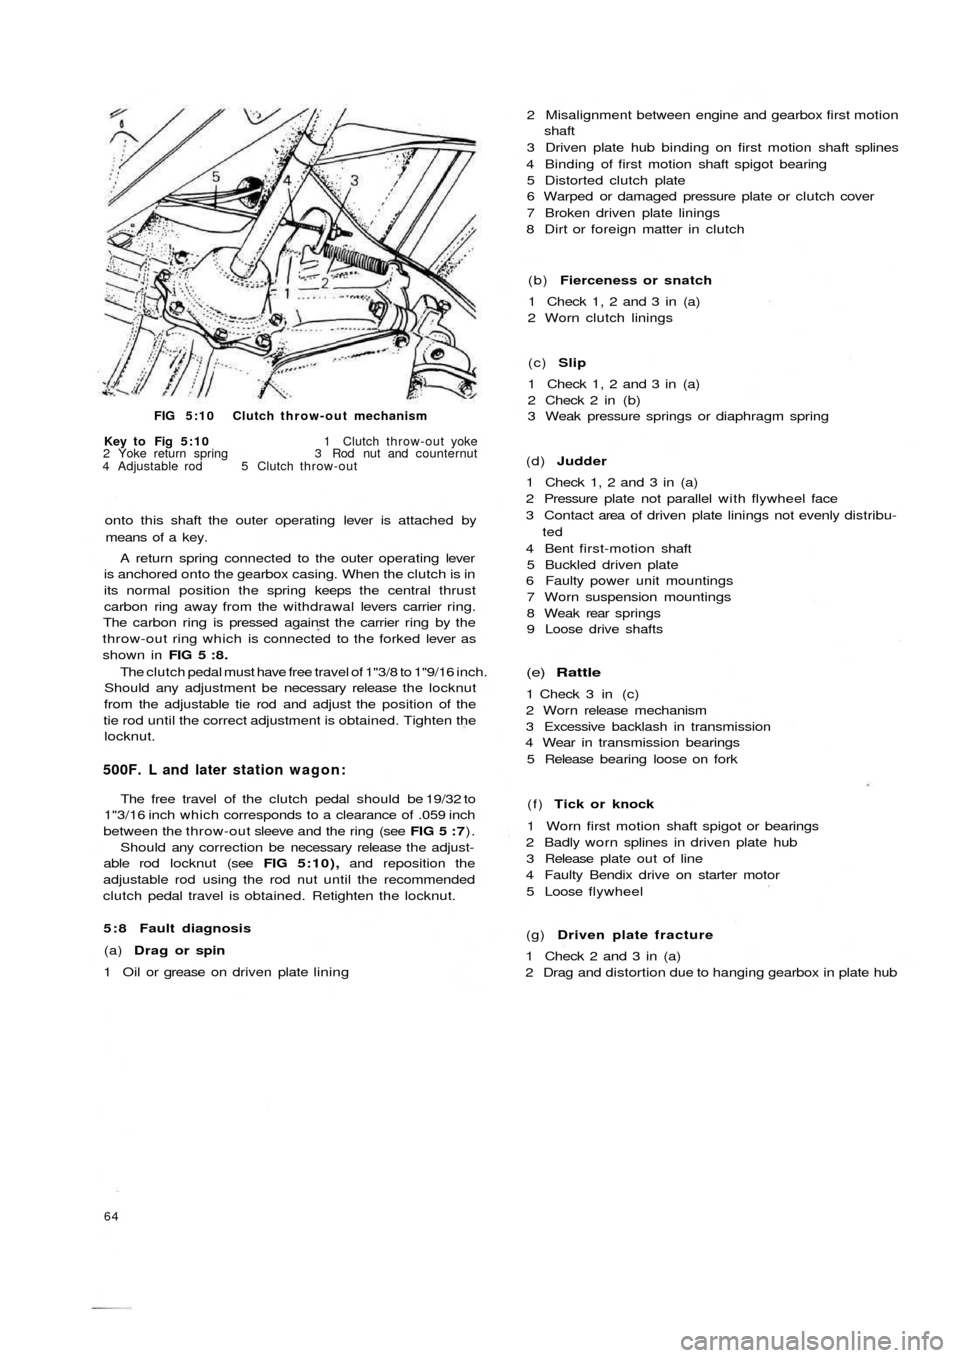 FIAT 500 1960 1.G Workshop Manual FIG 5:10 Clutch throw-out mechanism
Key to  Fig  5:10 1 Clutch throw-out yoke
2 Yoke return spring 3 Rod nut and counternut
4 Adjustable rod  5  Clutch throw-out
onto this shaft the outer operating le